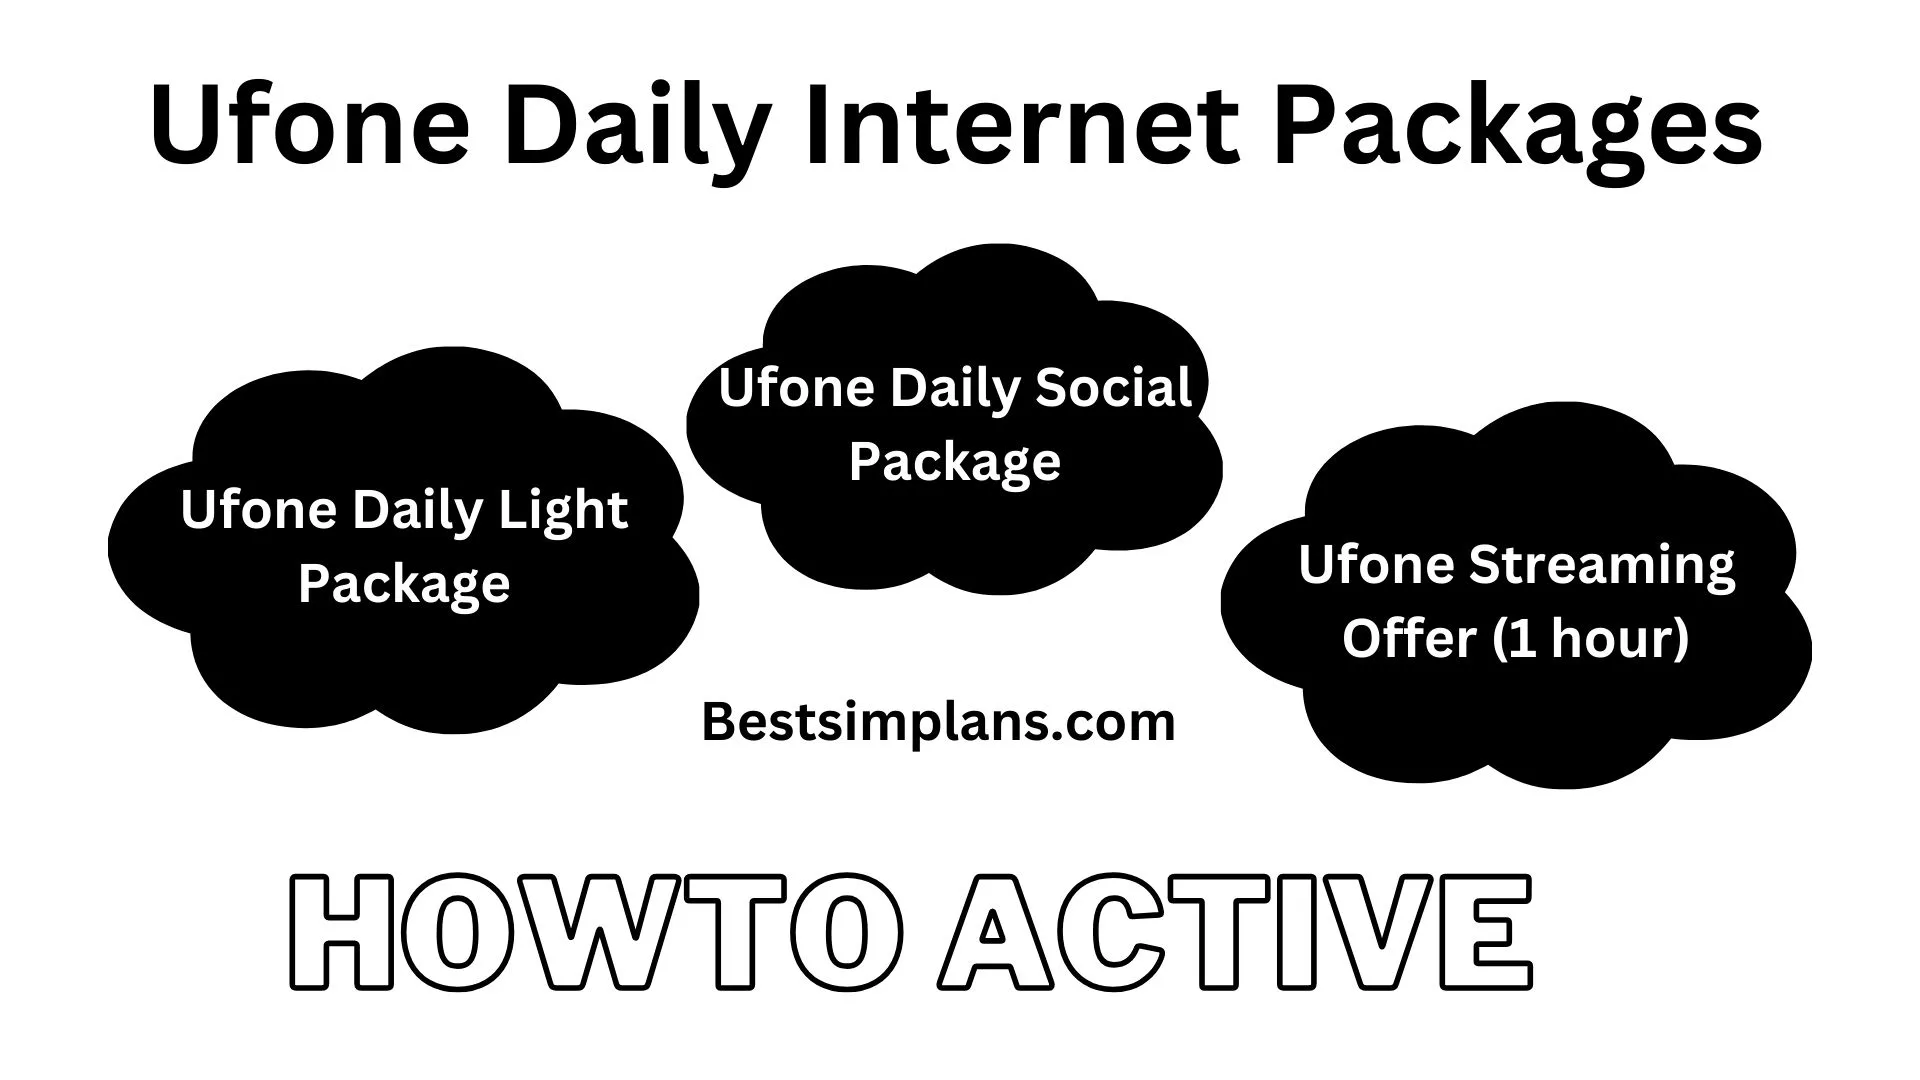 Ufone Daily Internet Packages 1 Day